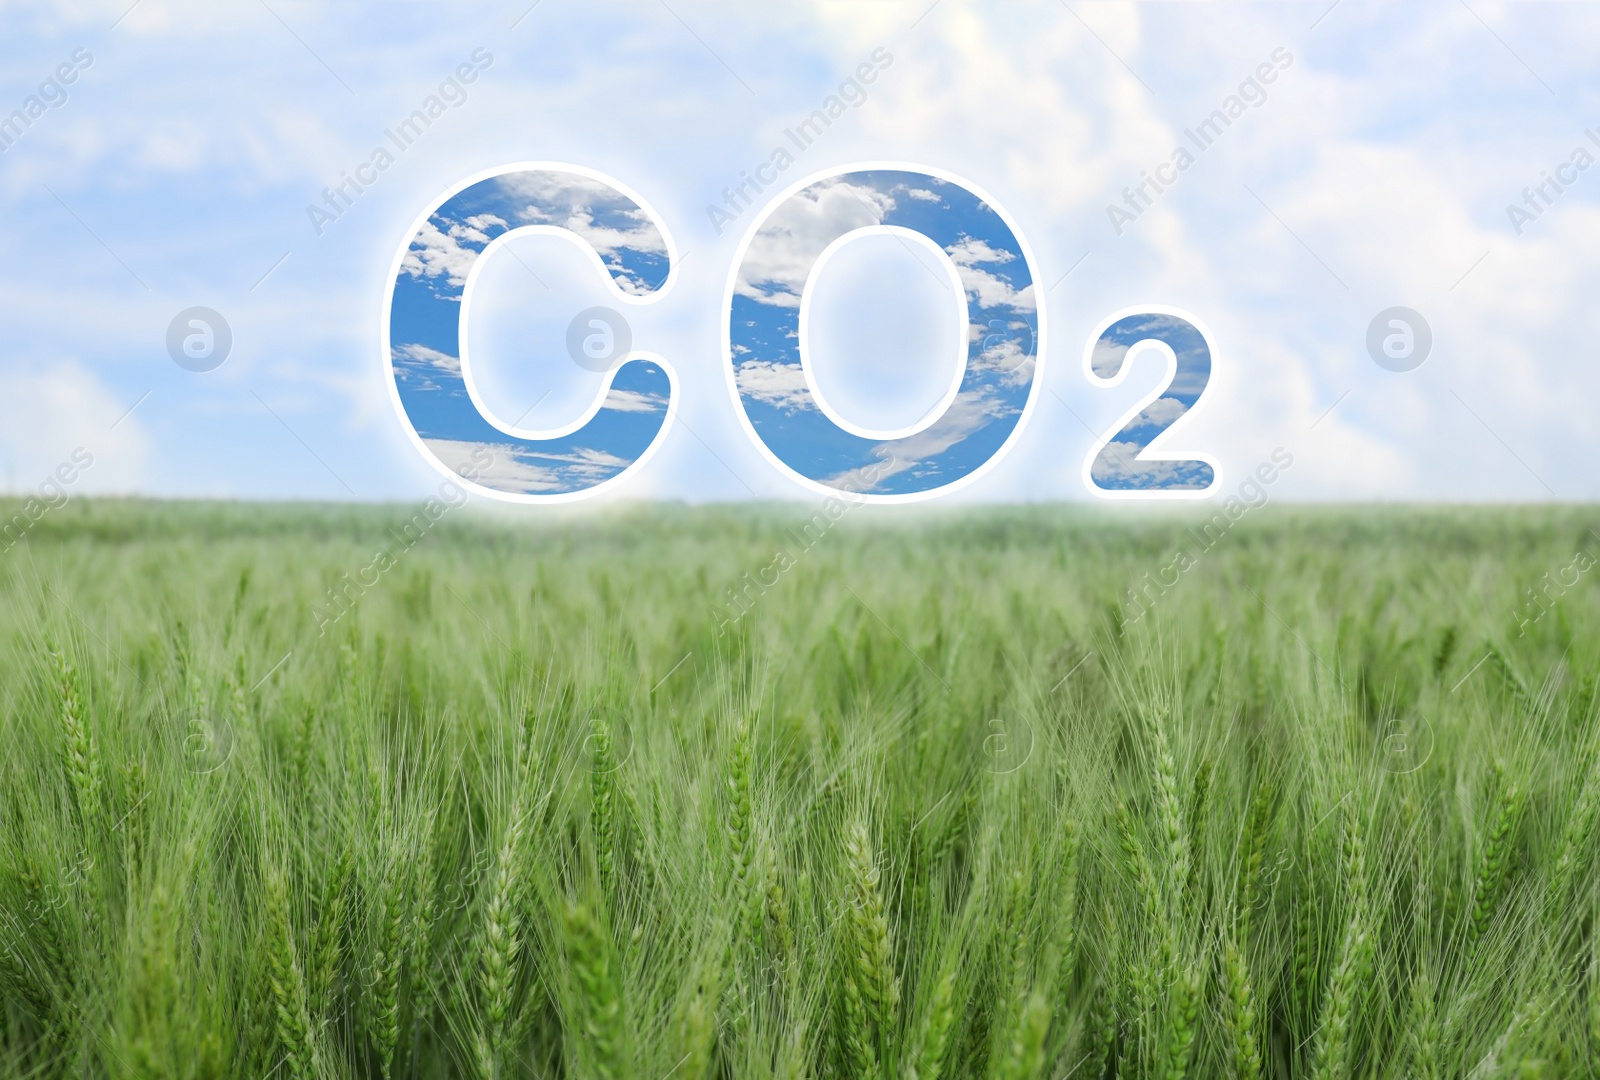 Image of Reduce CO2 emissions. Beautiful view of wheat field